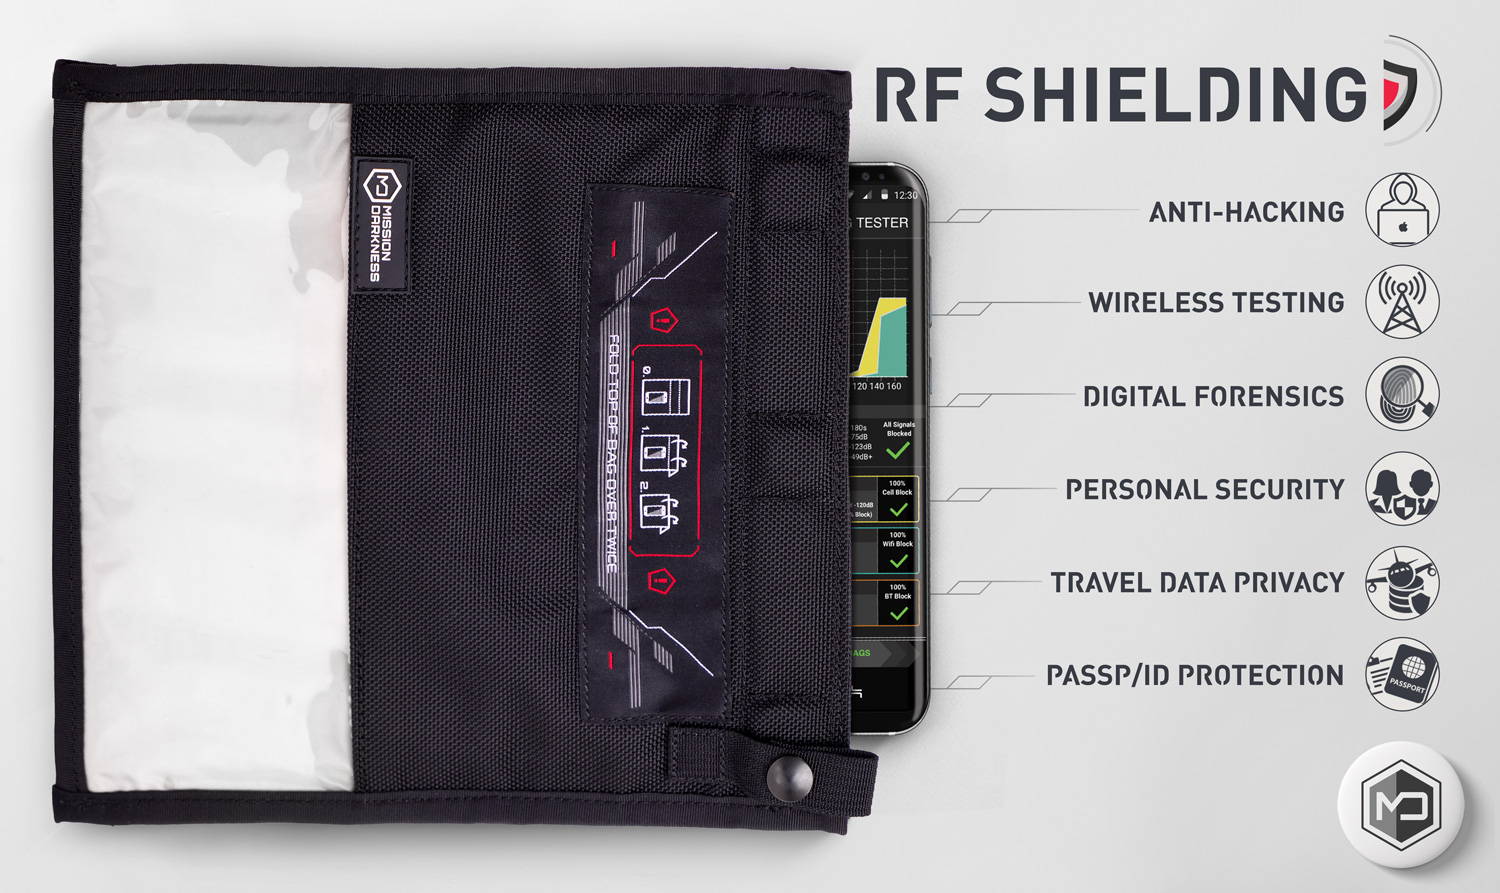 Mission Darkness Faraday Bags offer the ultimate RF shielding and innovative features